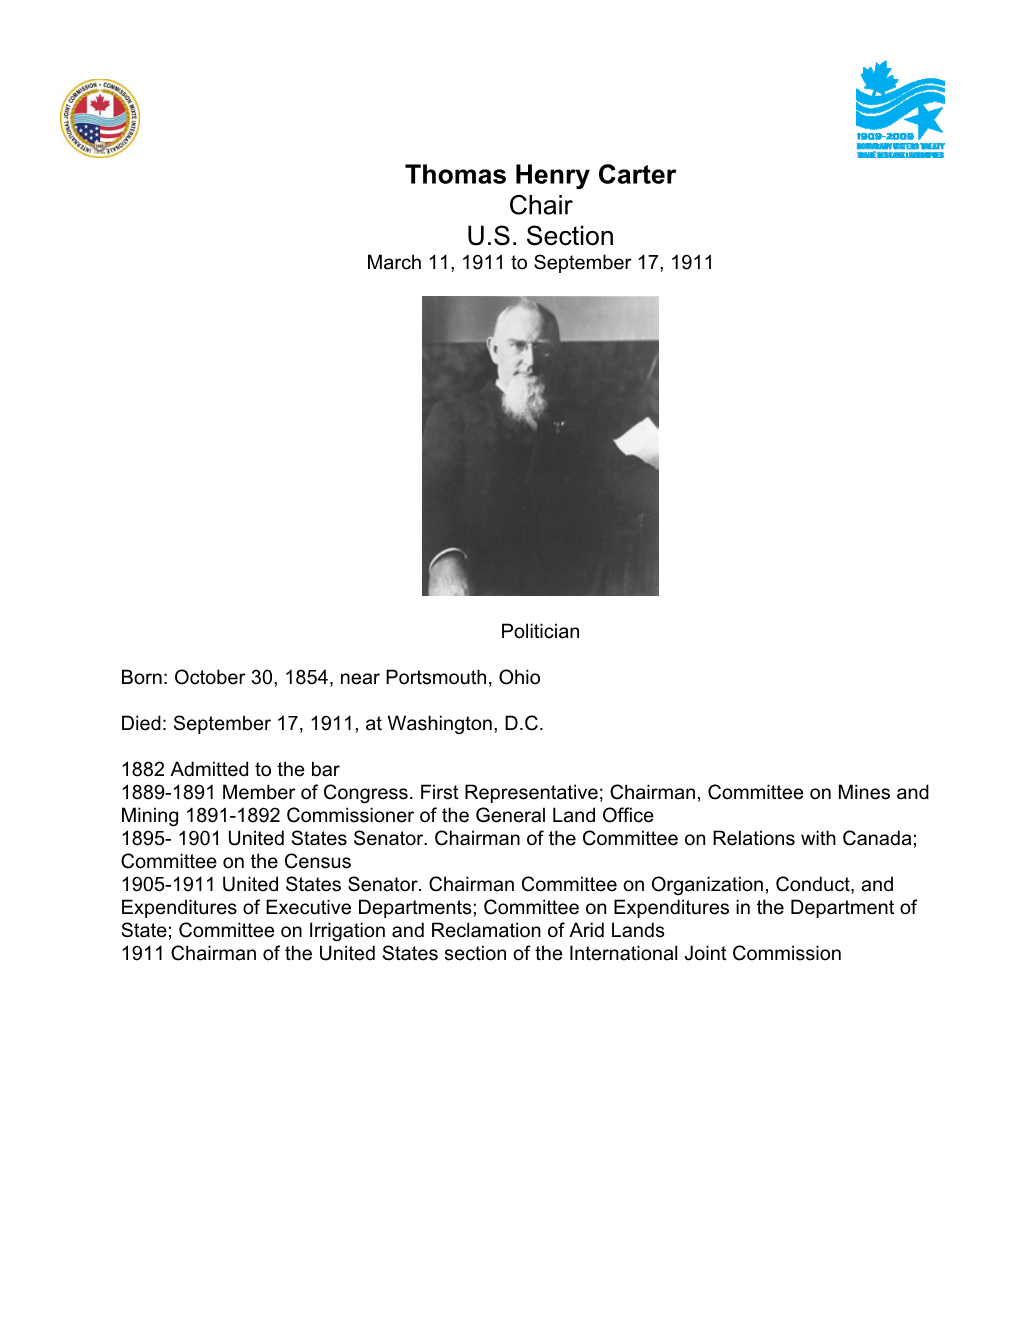 Thomas Henry Carter Chair U.S. Section March 11, 1911 to September 17, 1911